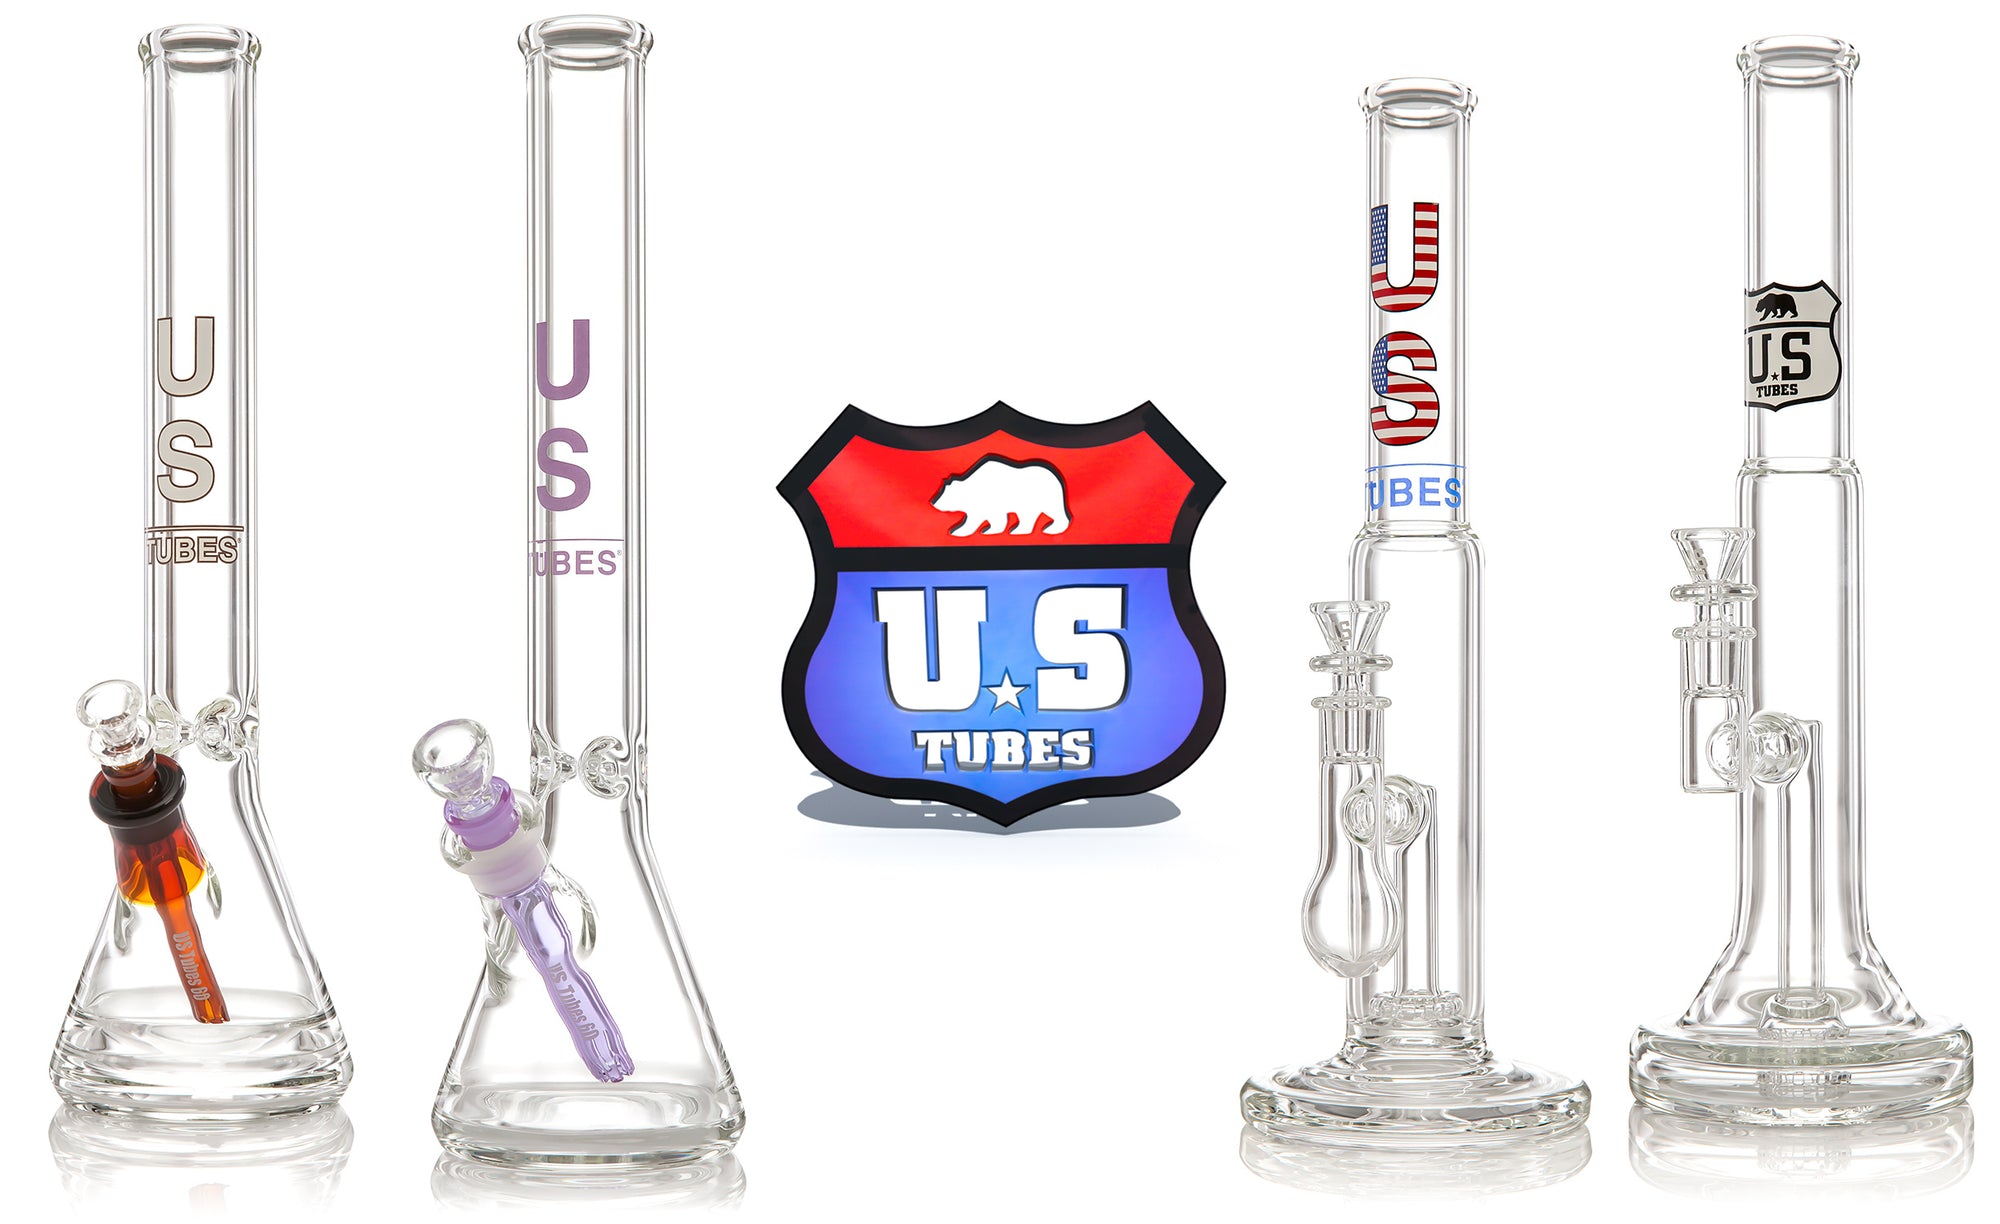 US TUBES Banner with four water pipes and US Tubes logo in the center with drop shadow